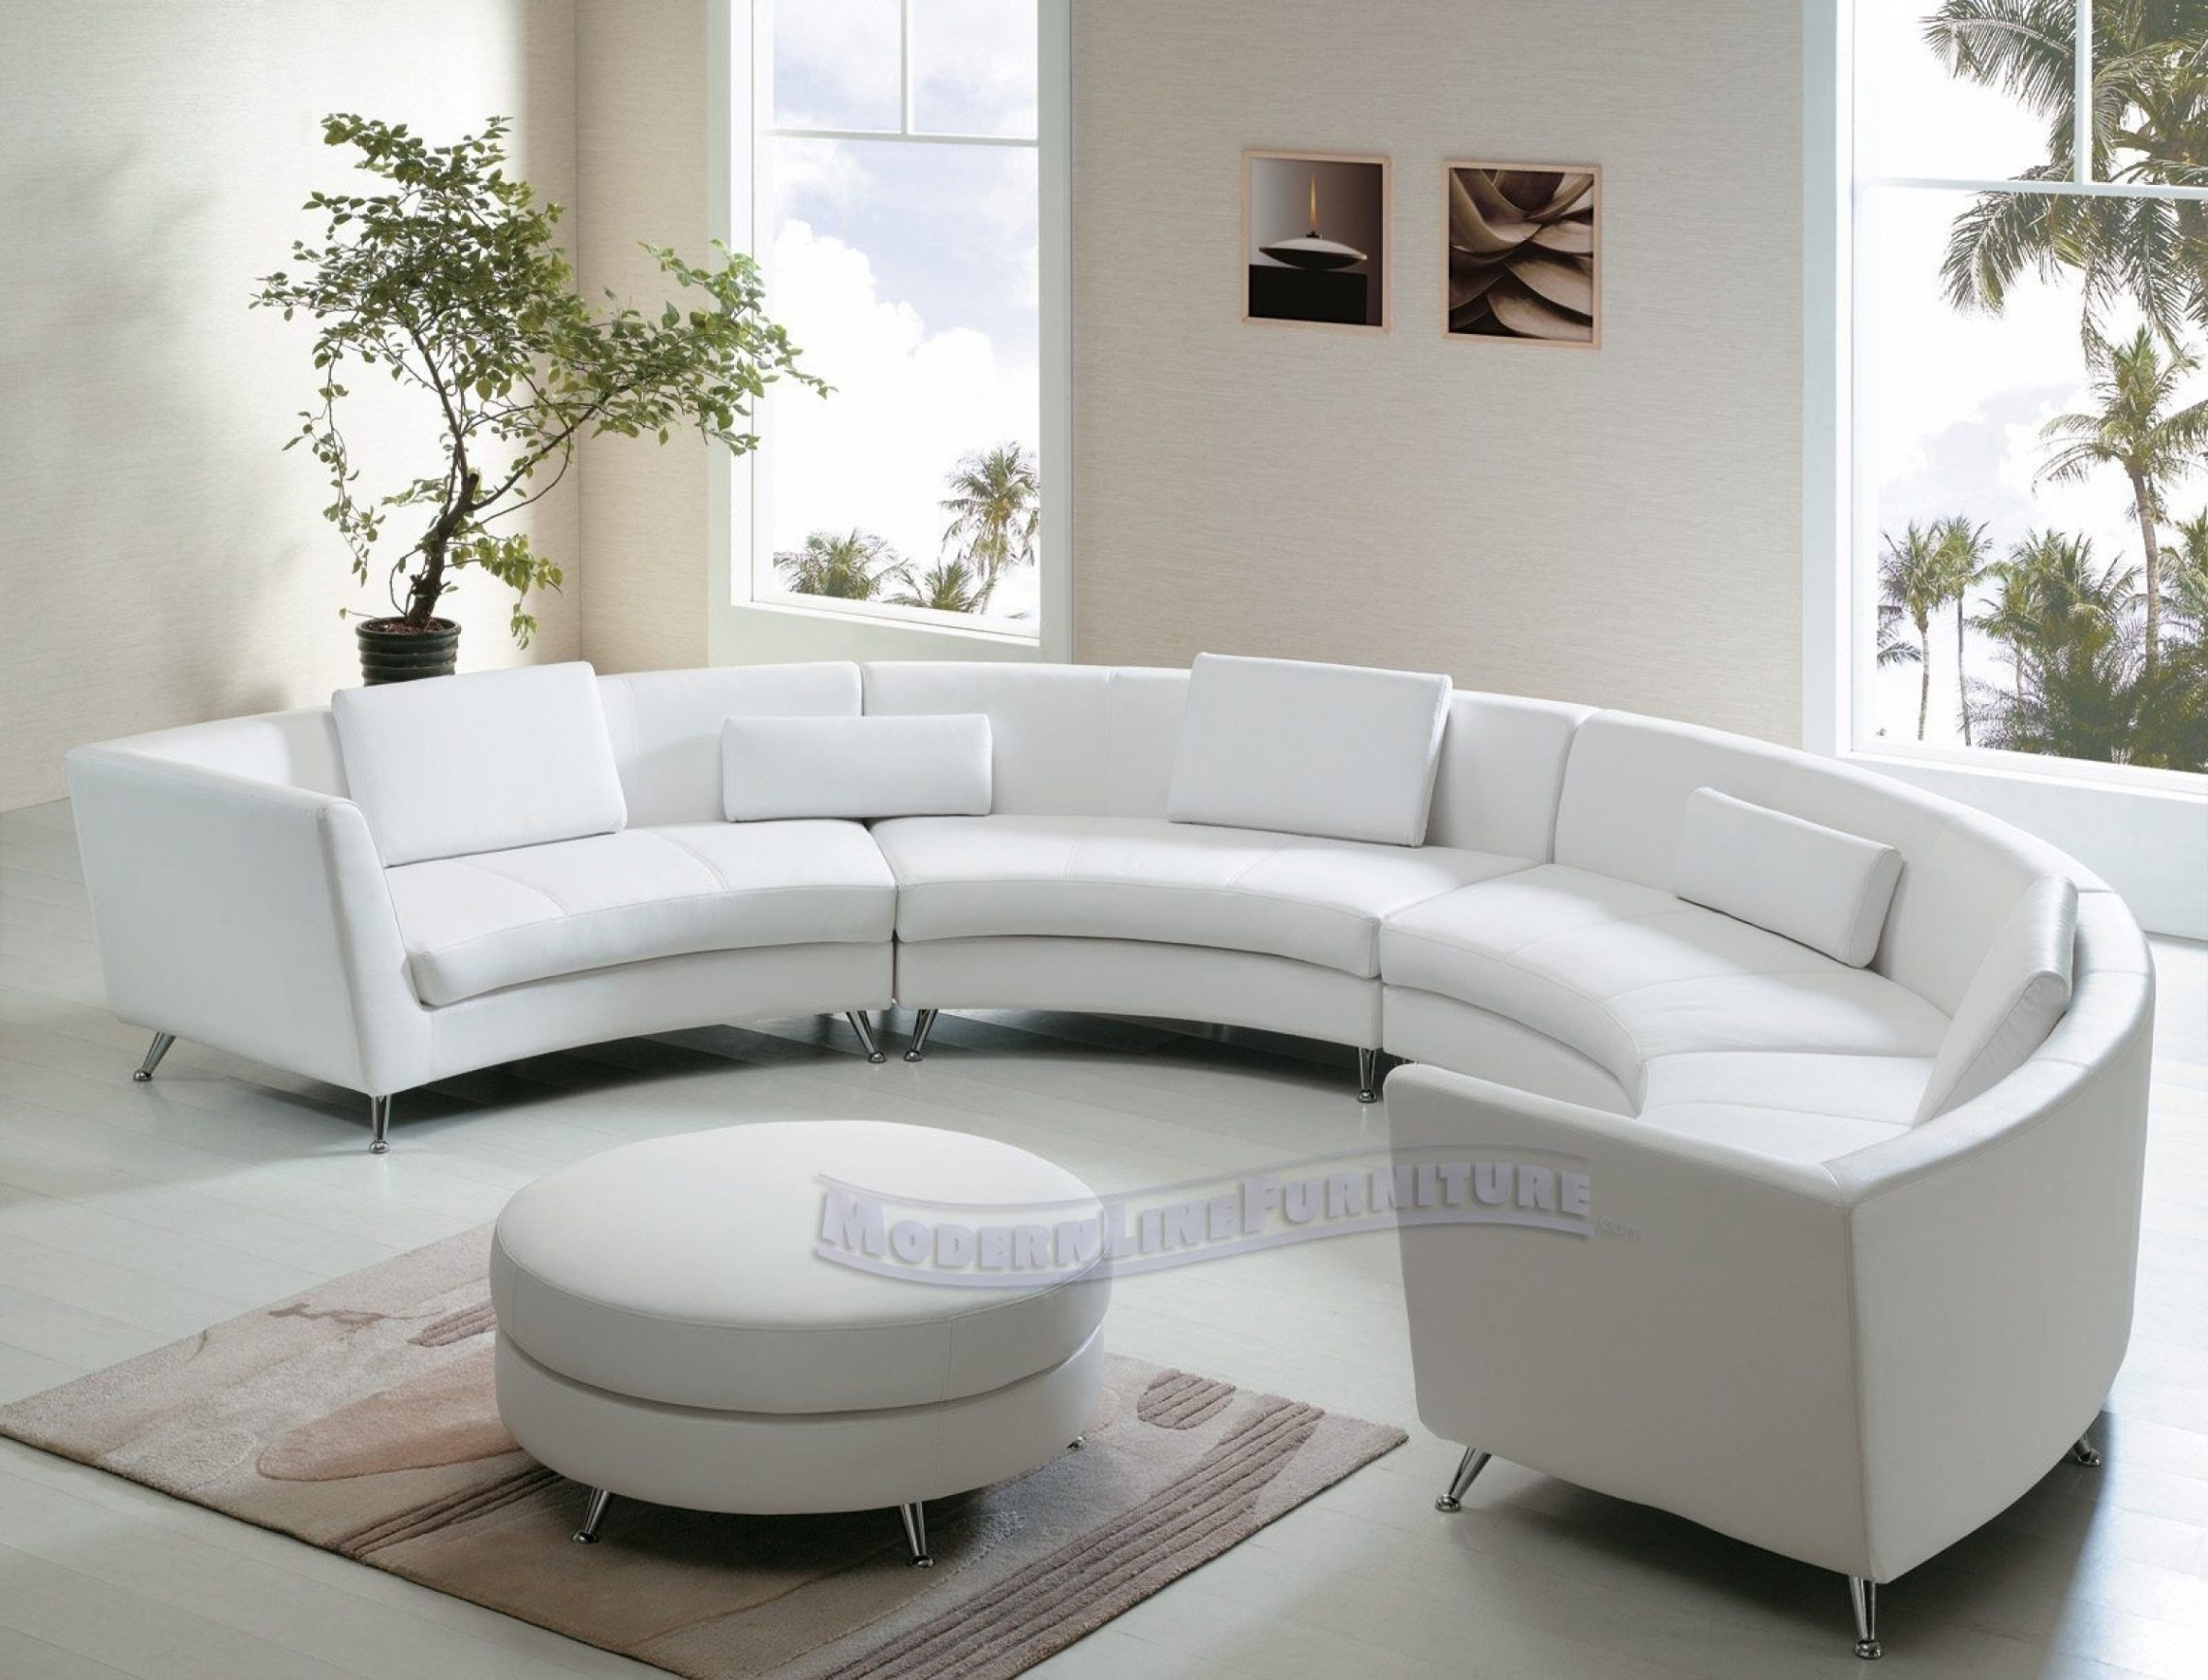 Curved leather sectional sofa